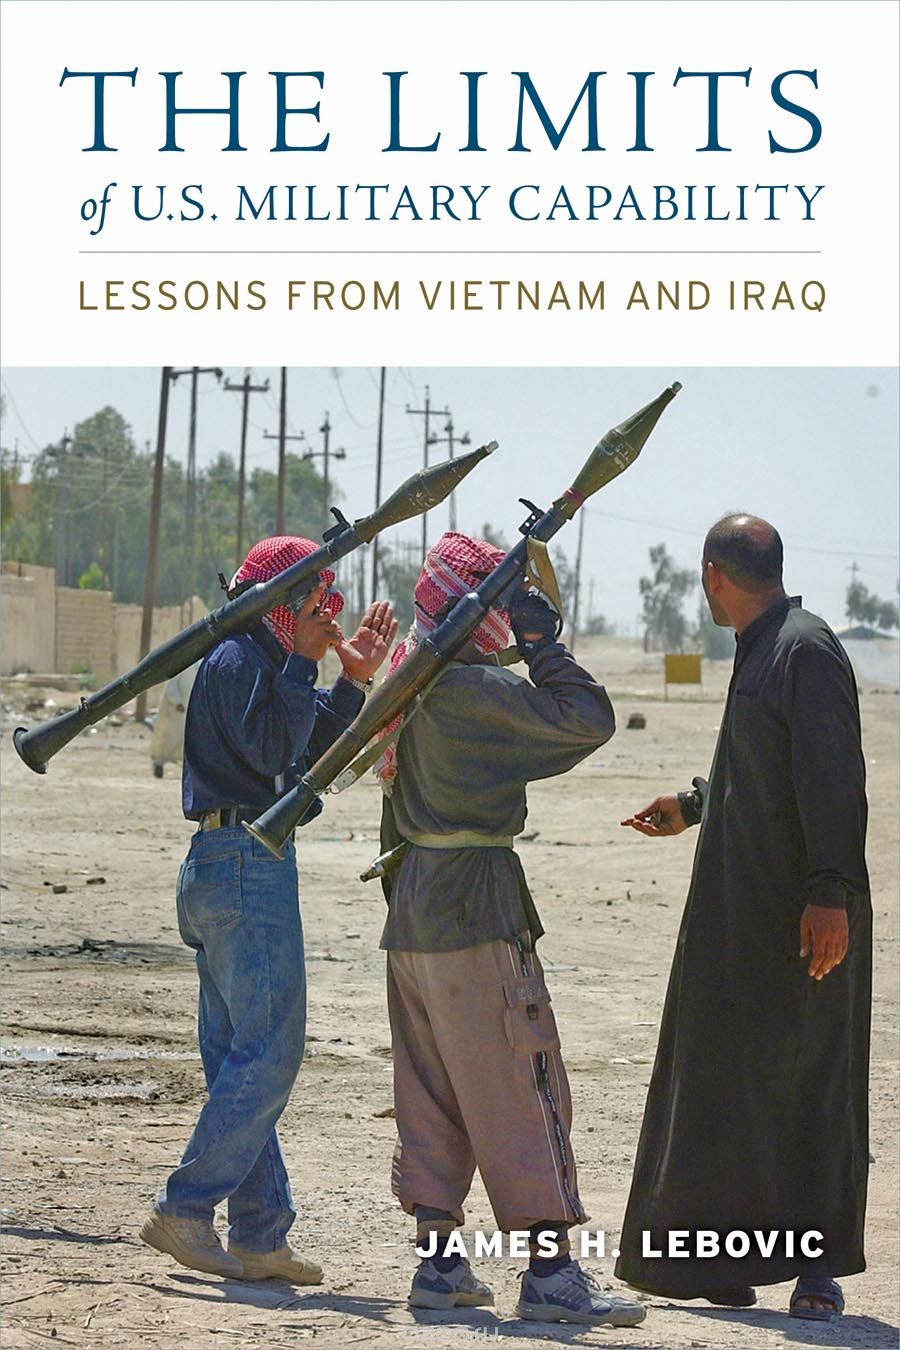 Скачать книгу "The Limits of U.S. Military Capability – Lessons from Vietnam and Iraq"